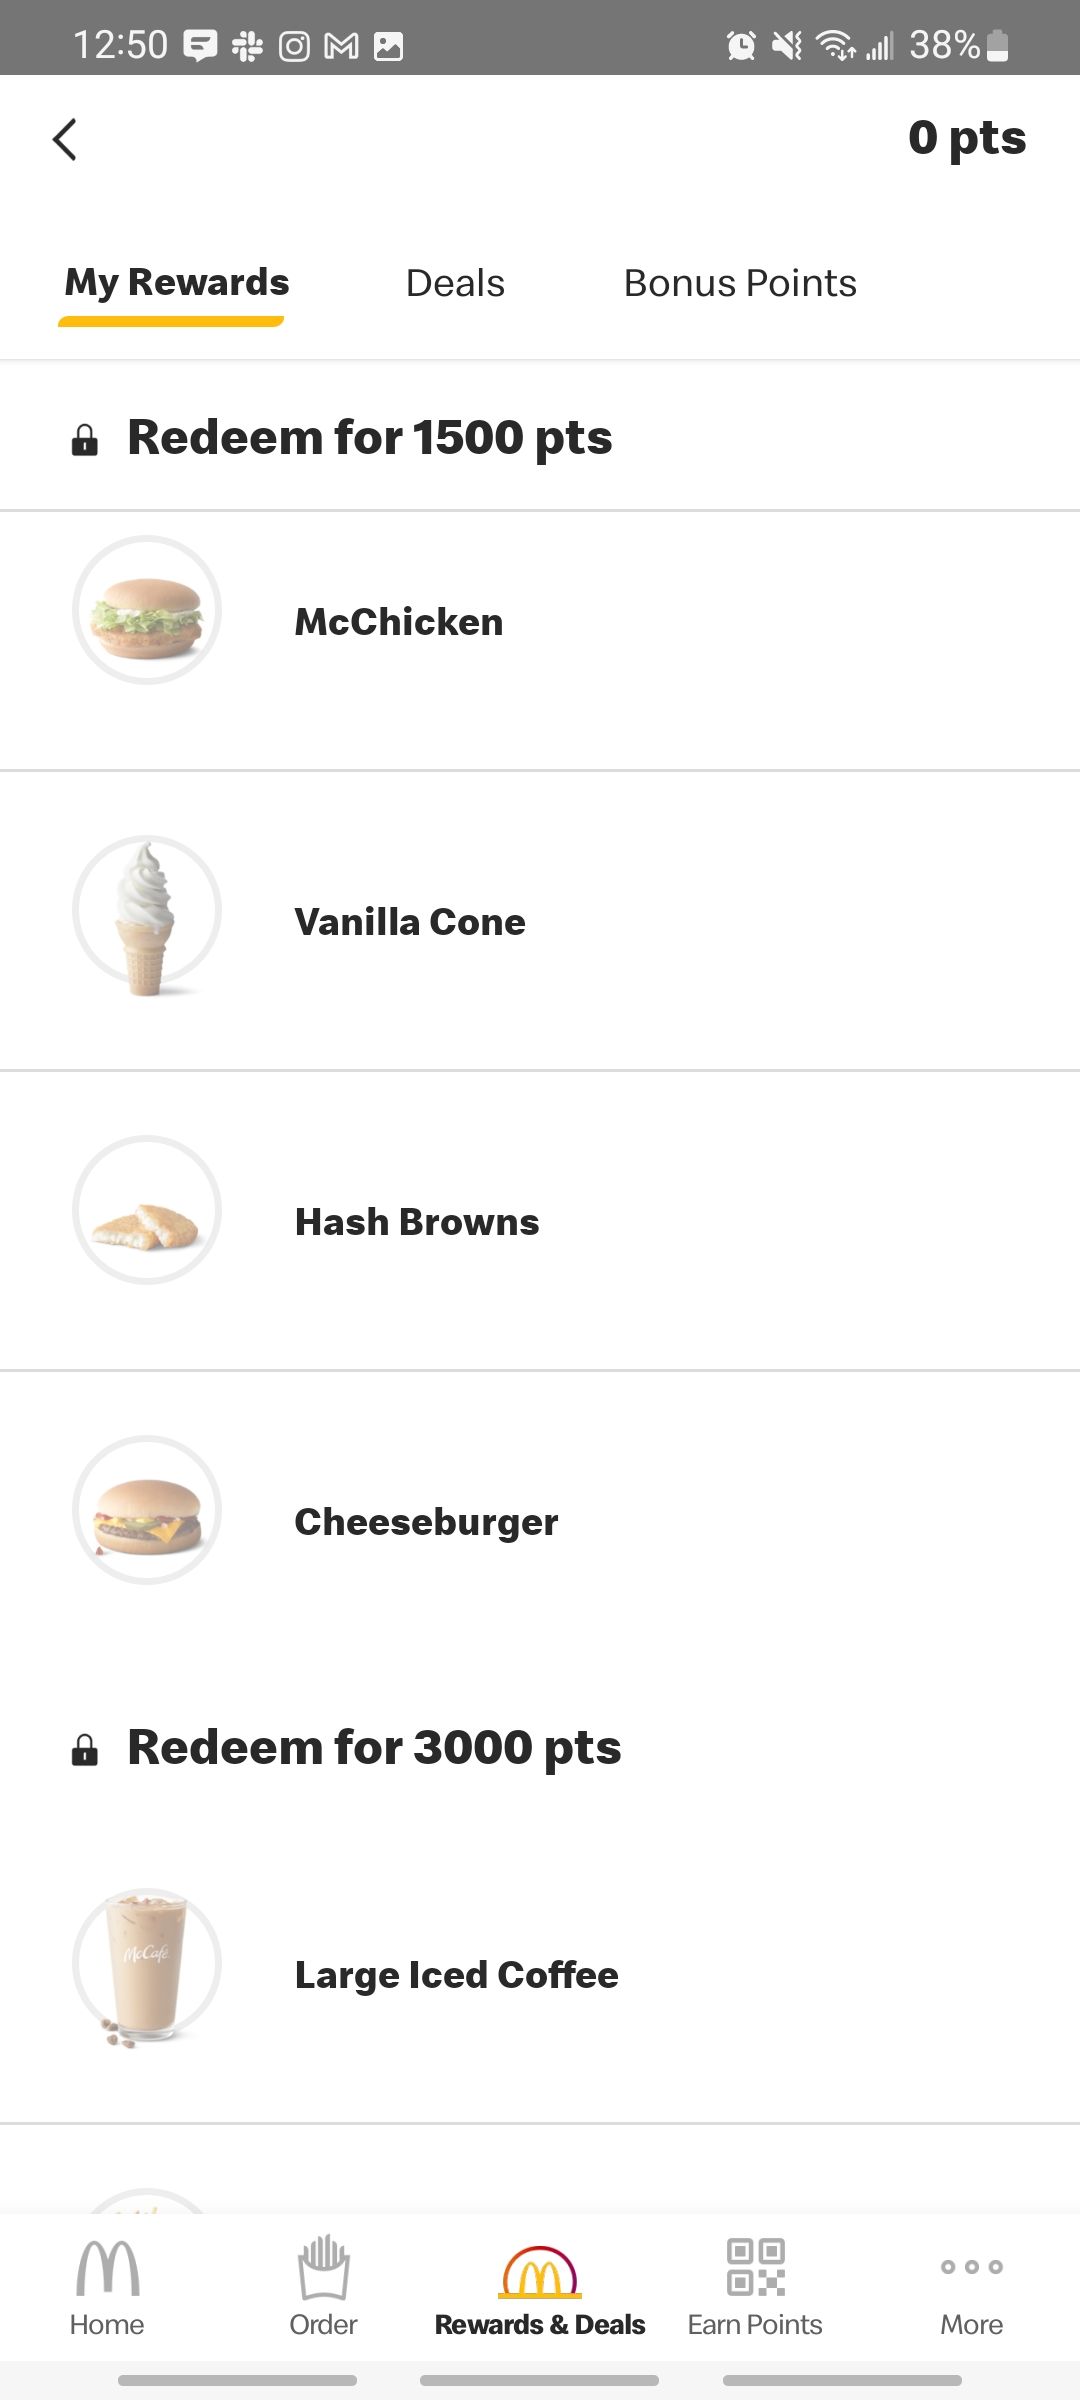 mcdonalds app my rewards screen showing what you can redeem for specific point numbers